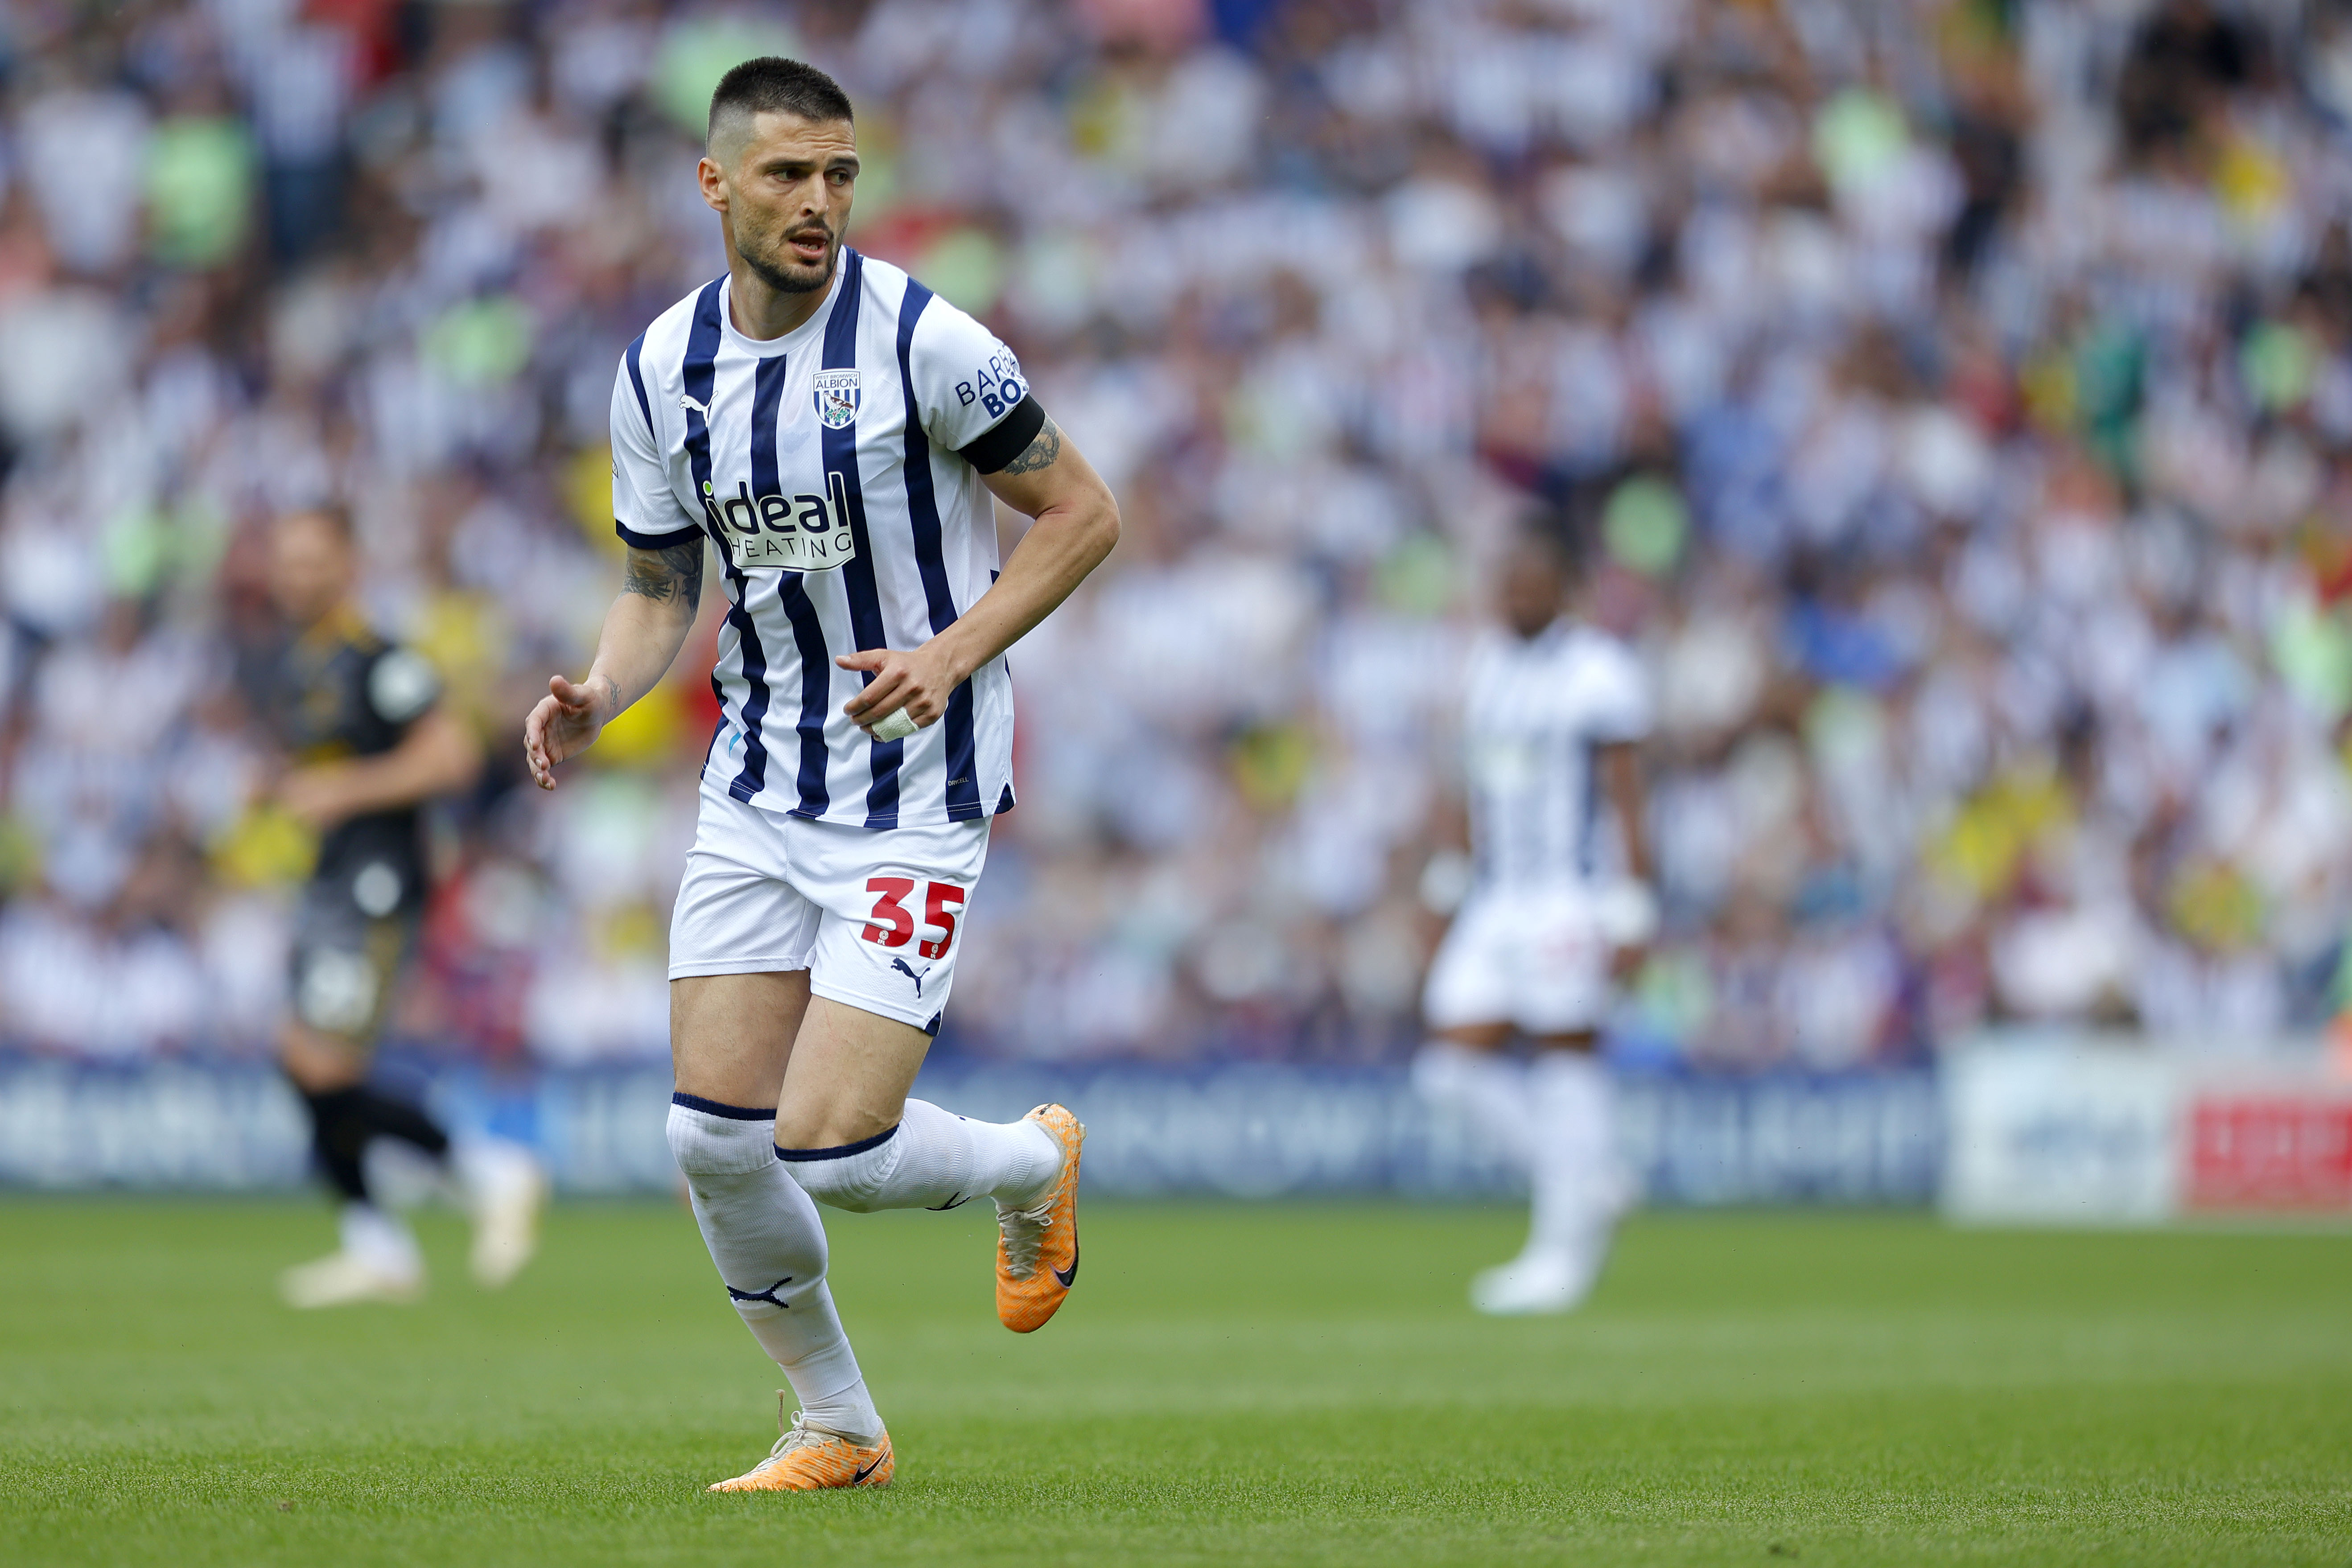 Okay Yokuslu in action for Albion against Southampton at The Hawthorns wearing the home kit